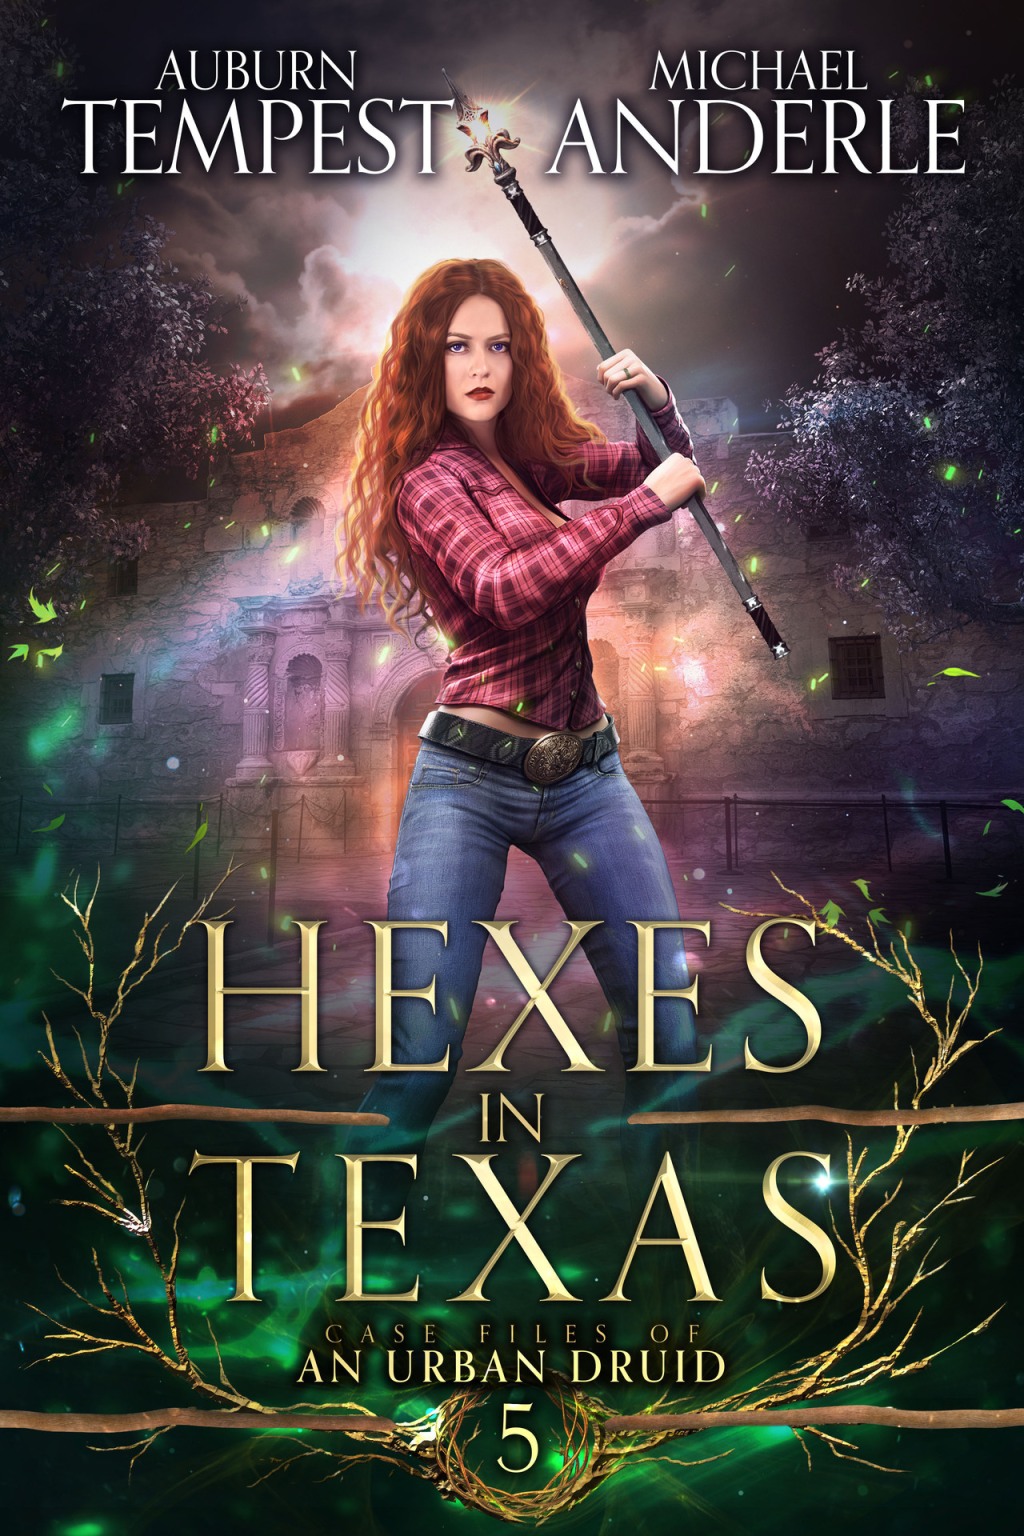 Hexes in Texas – Not the best in the series but okay reading.